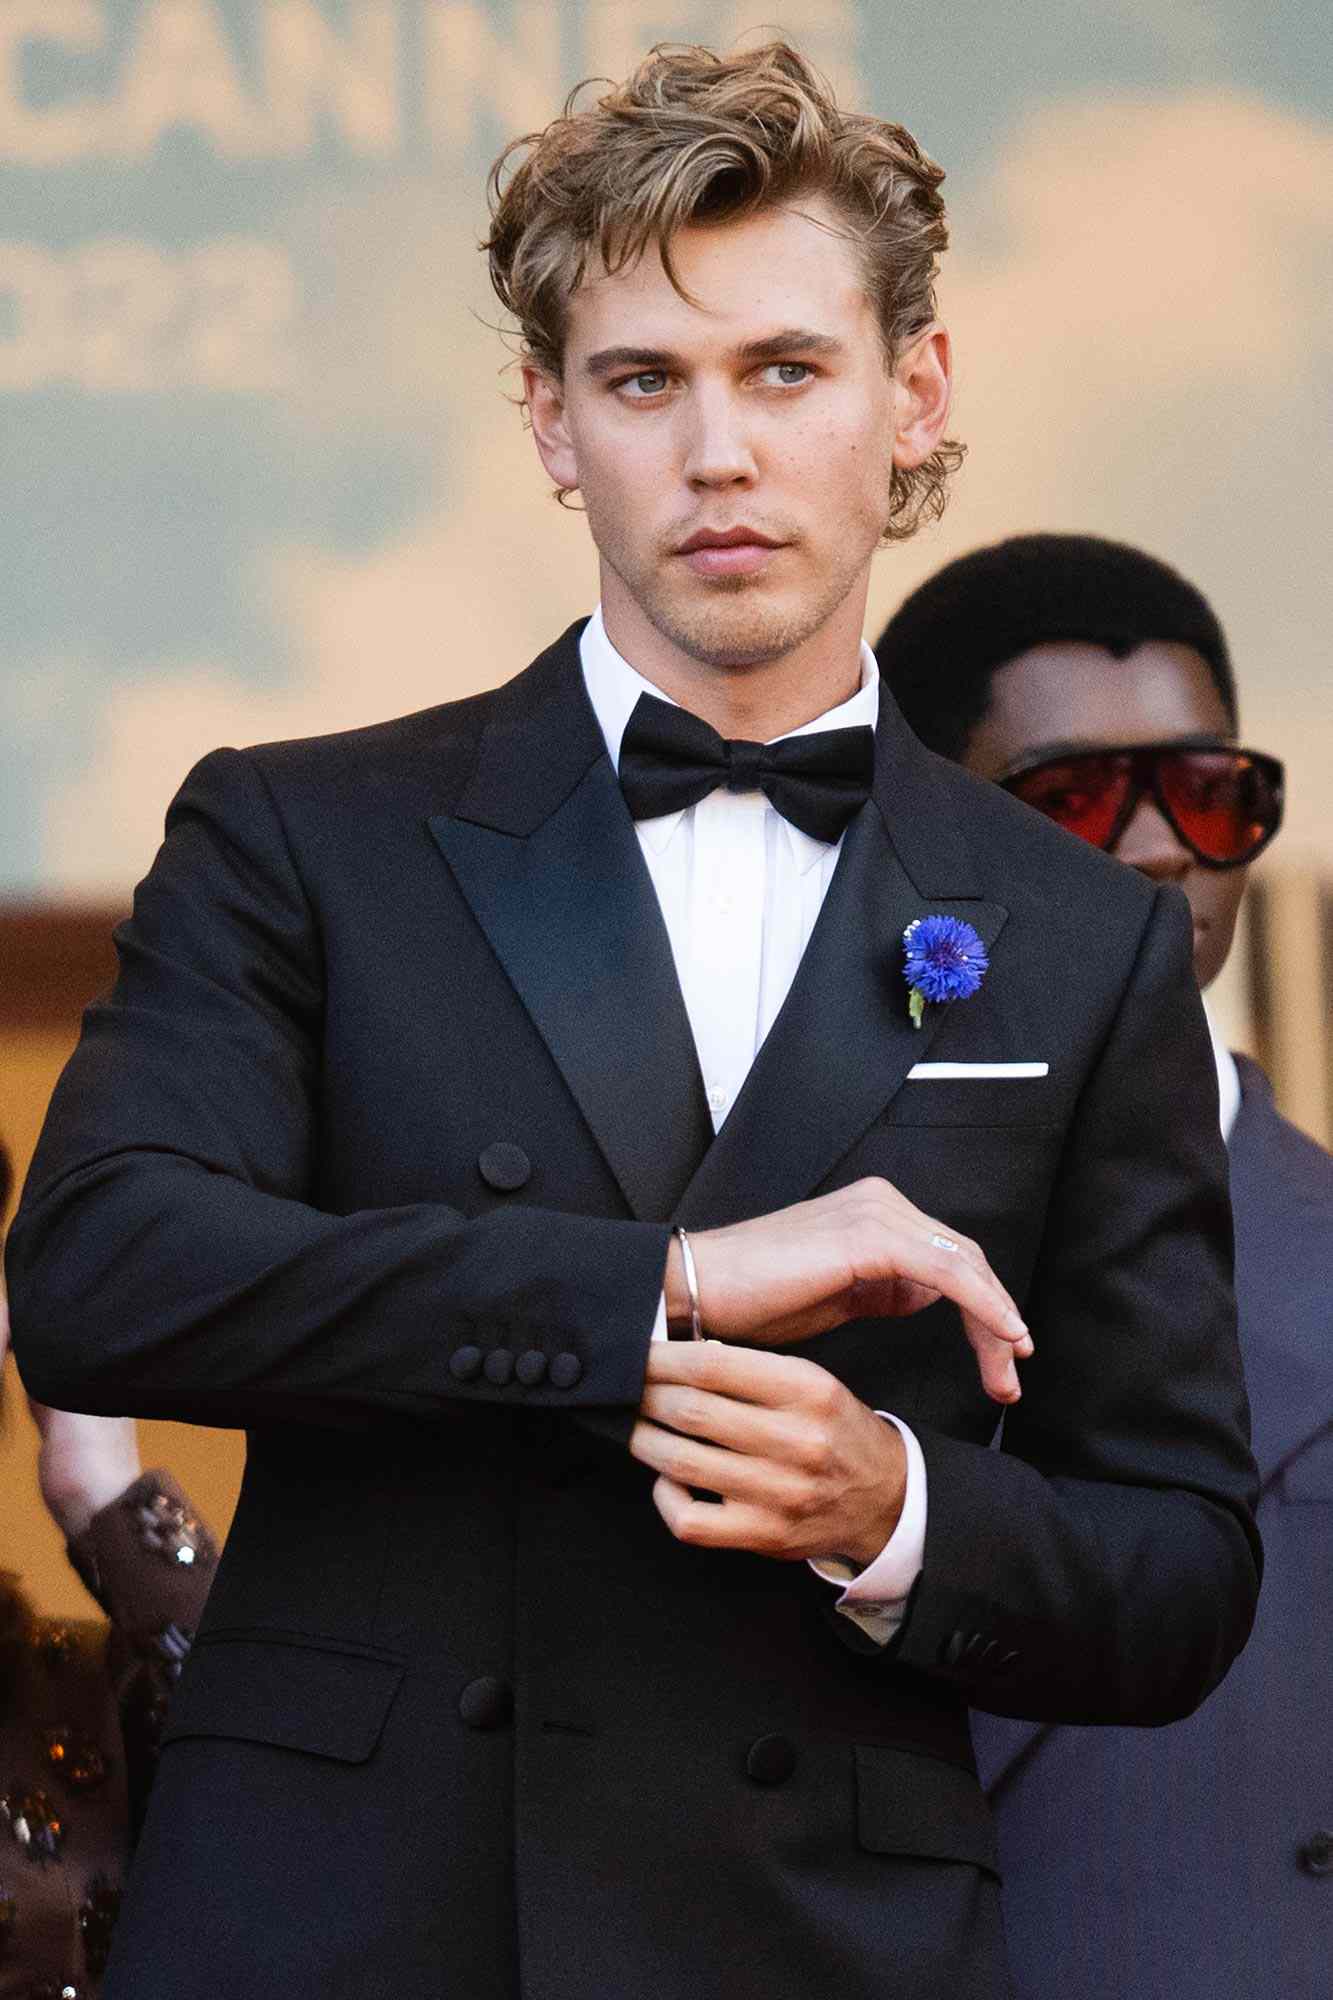 Austin Butler attends the screening of "Elvis" during the 75th annual Cannes film festival at Palais des Festivals on May 25, 2022 in Cannes, France.